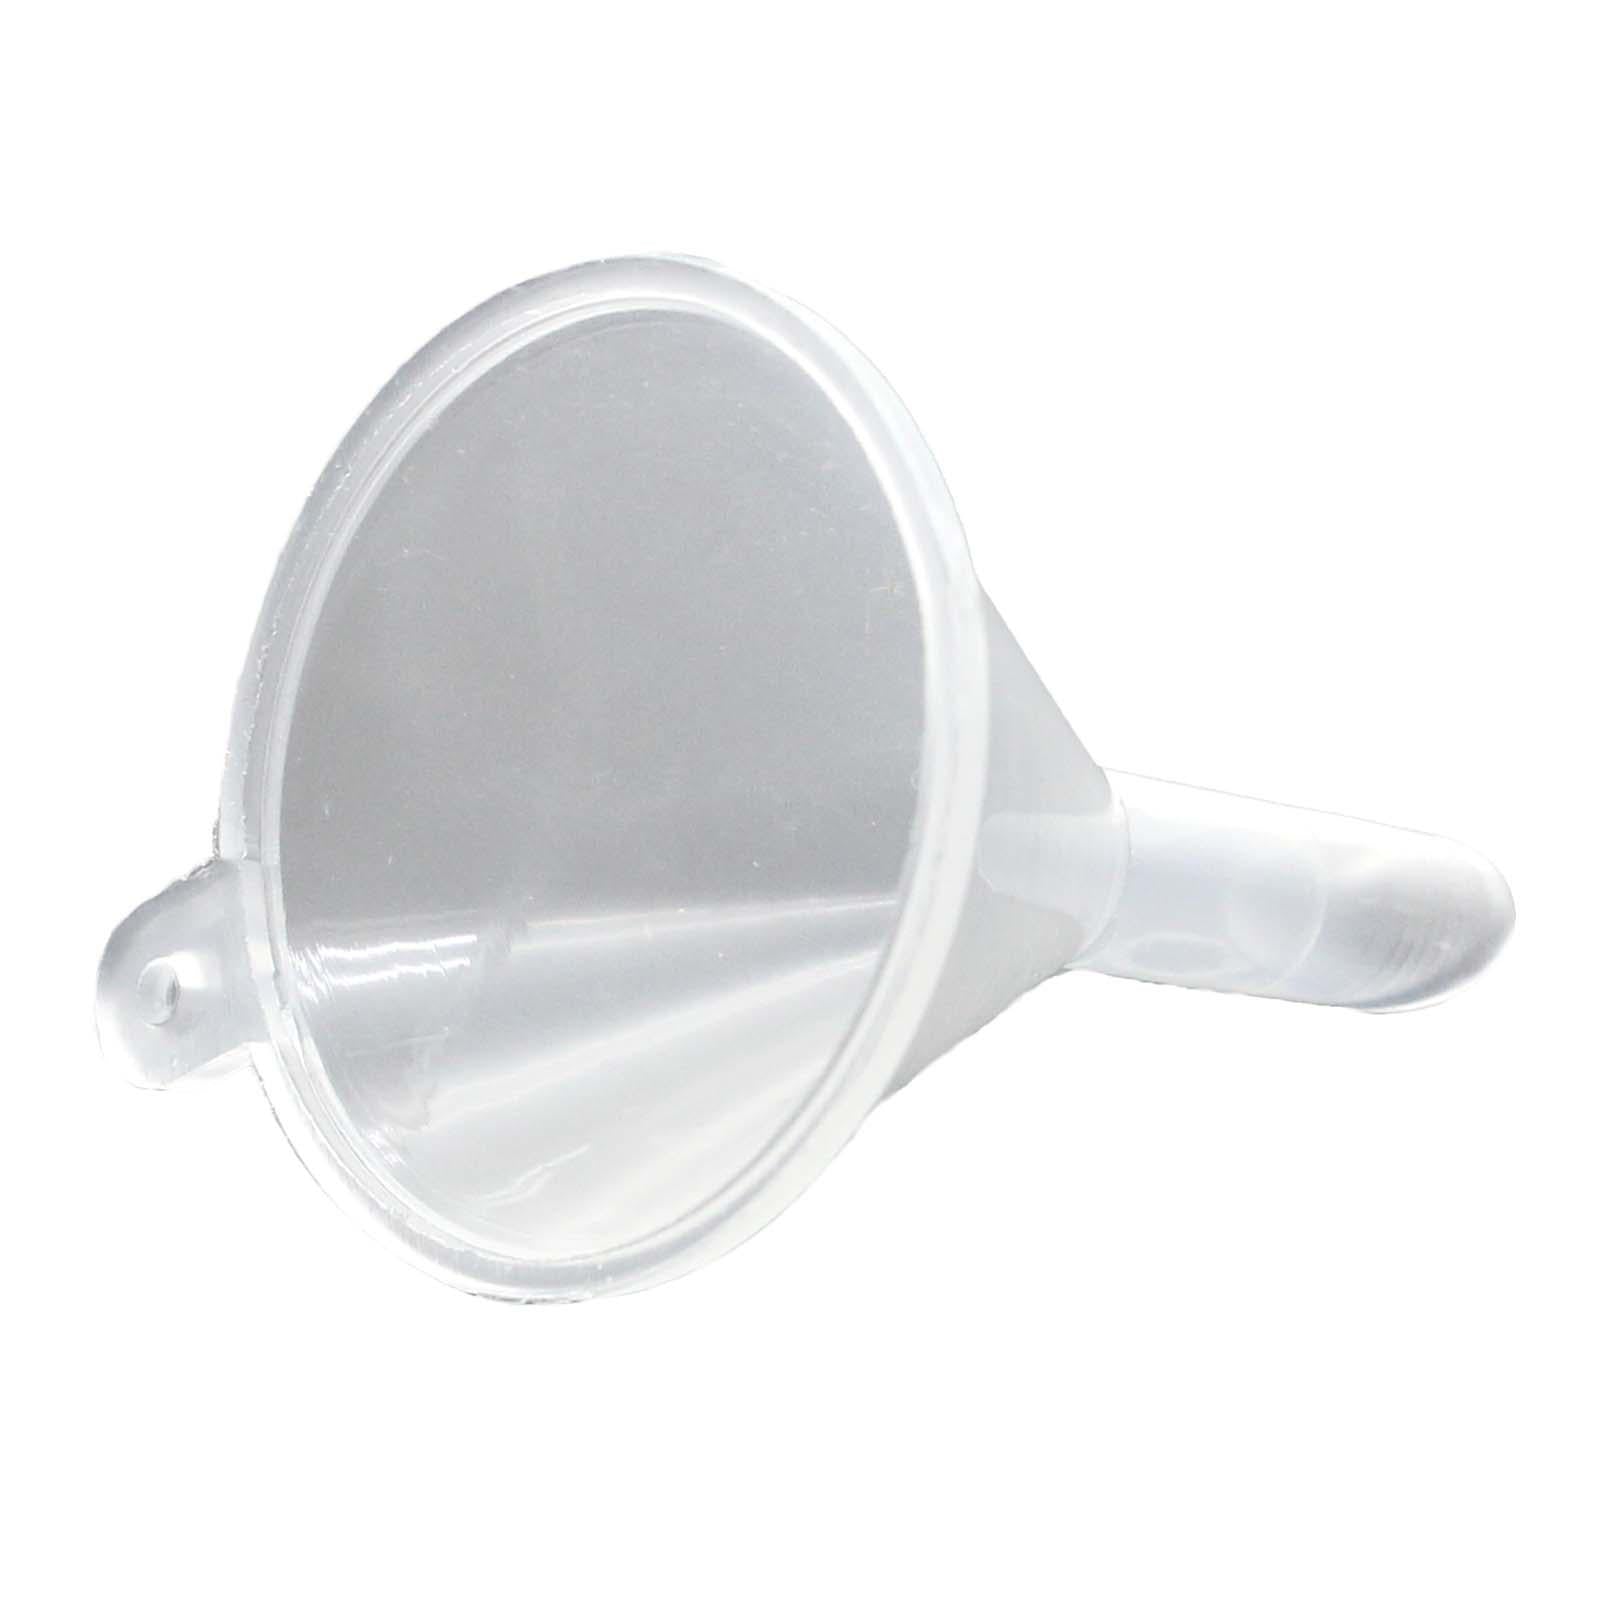 Plastic funnels for small volumes